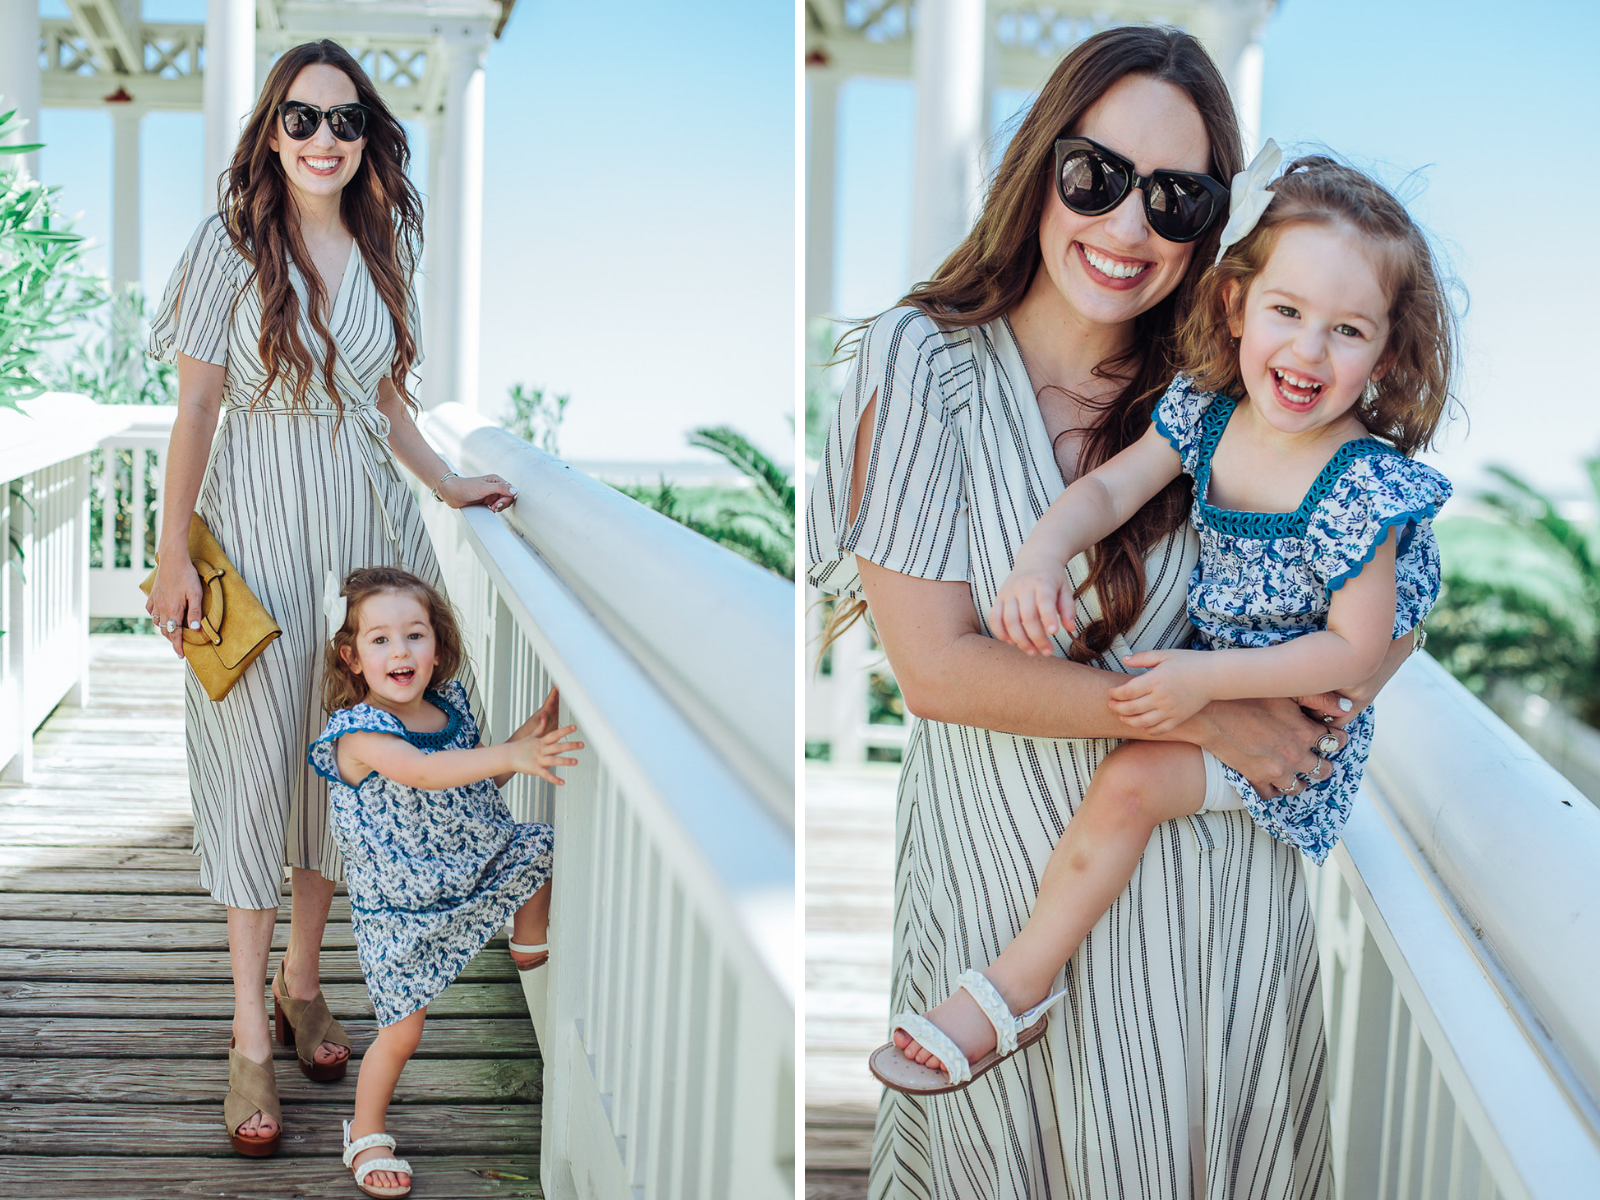 Francesca’s Sundress Outfits to wear for Mothers Day, featured by top US fashion blog, Lone Star Looking Glass: image of a woman wearing a Francesca’s striped midi dress, blocked heels and a yellow folder clutch